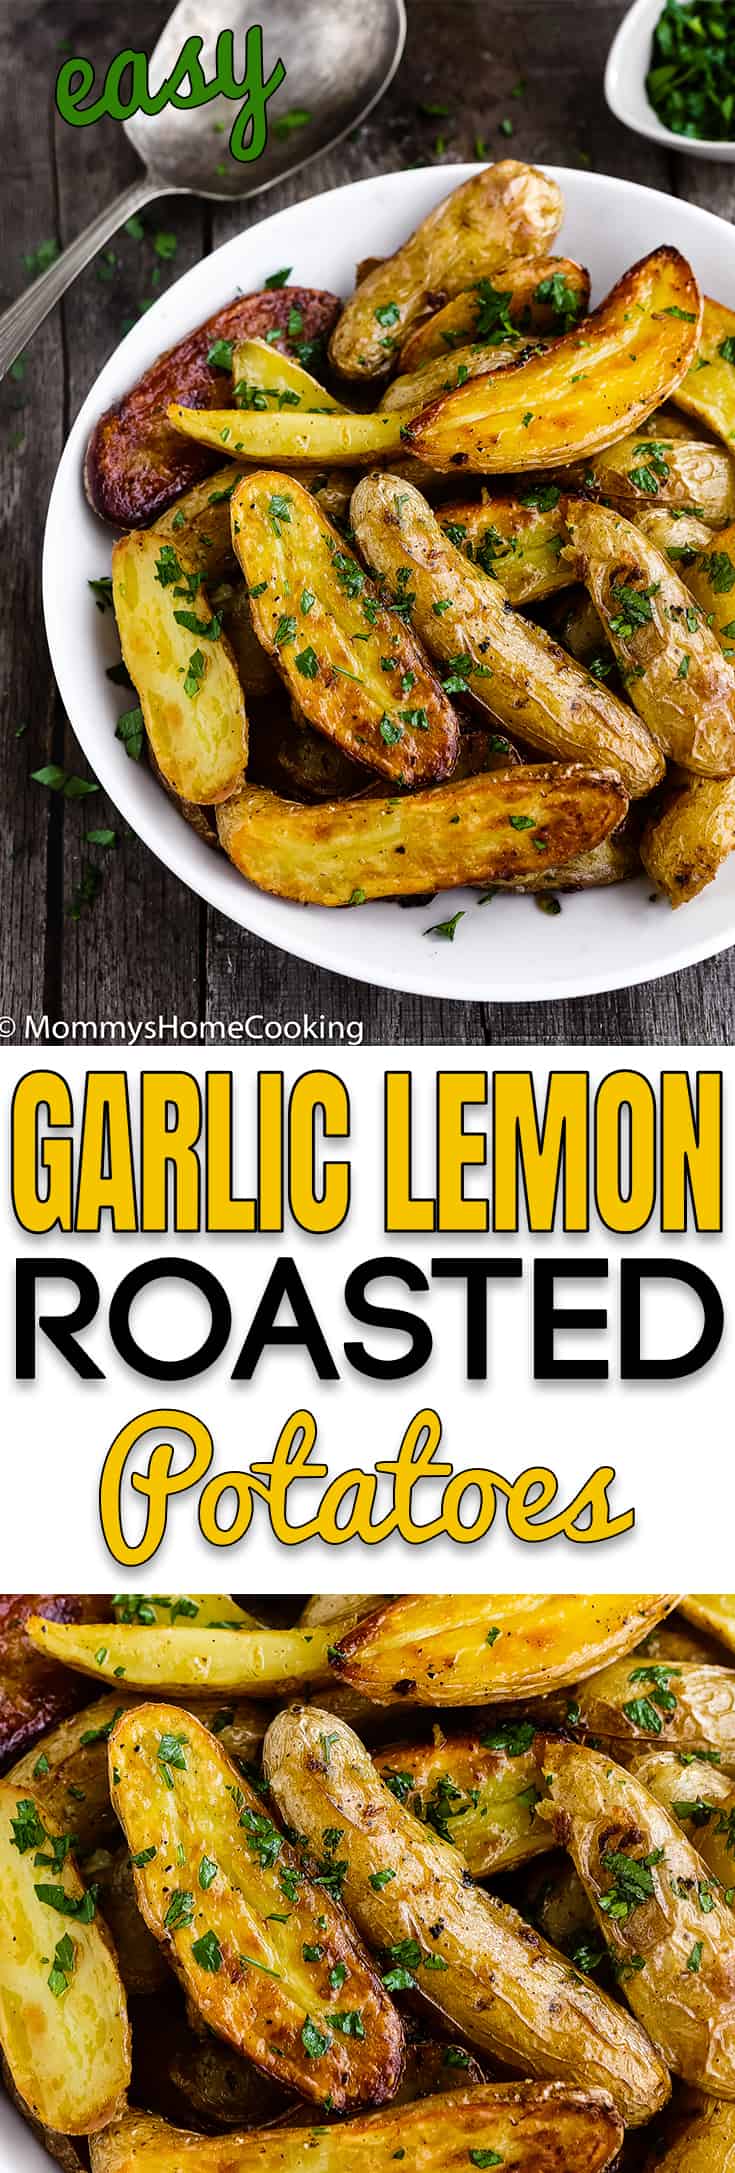 These Easy Garlic Lemon Roasted Potatoes are crispy outside, soft inside, a little salty and lemony. Perfect side dish for just about any entree. https://mommyshomecooking.com